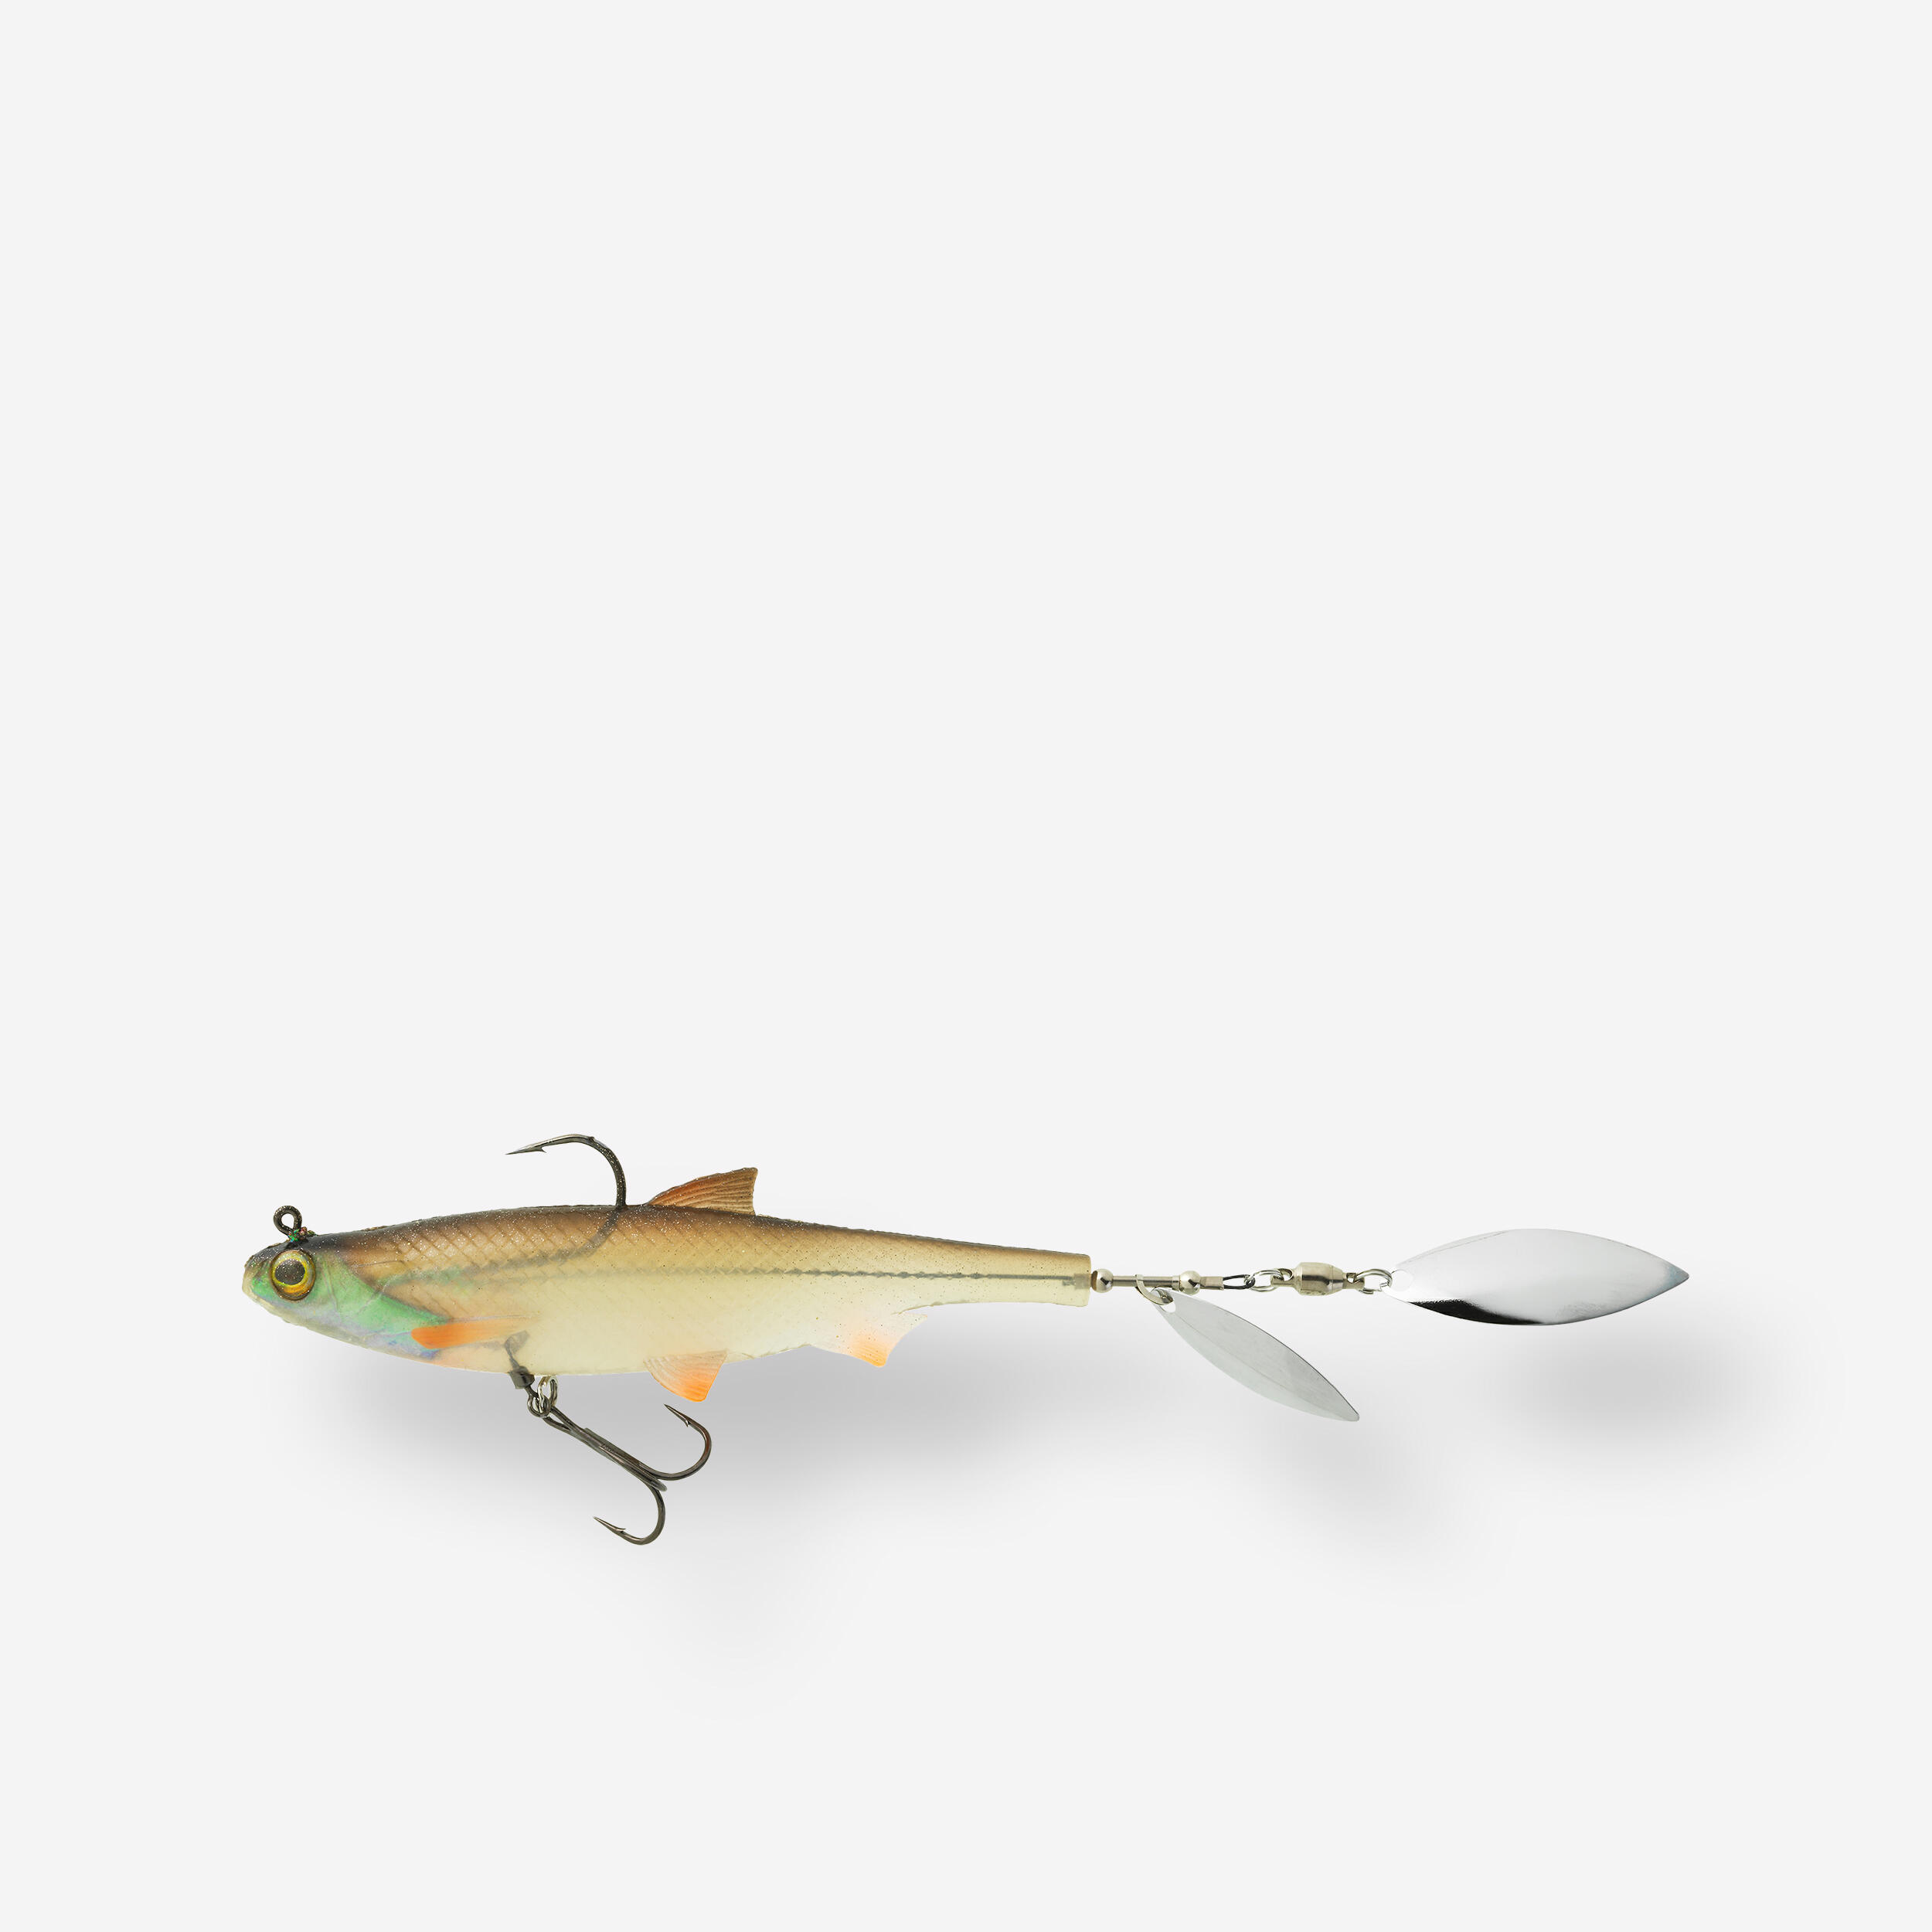 LURE FISHING ROACHSPIN 120 ROACH BLADED SHAD SOFT LURE 1/2